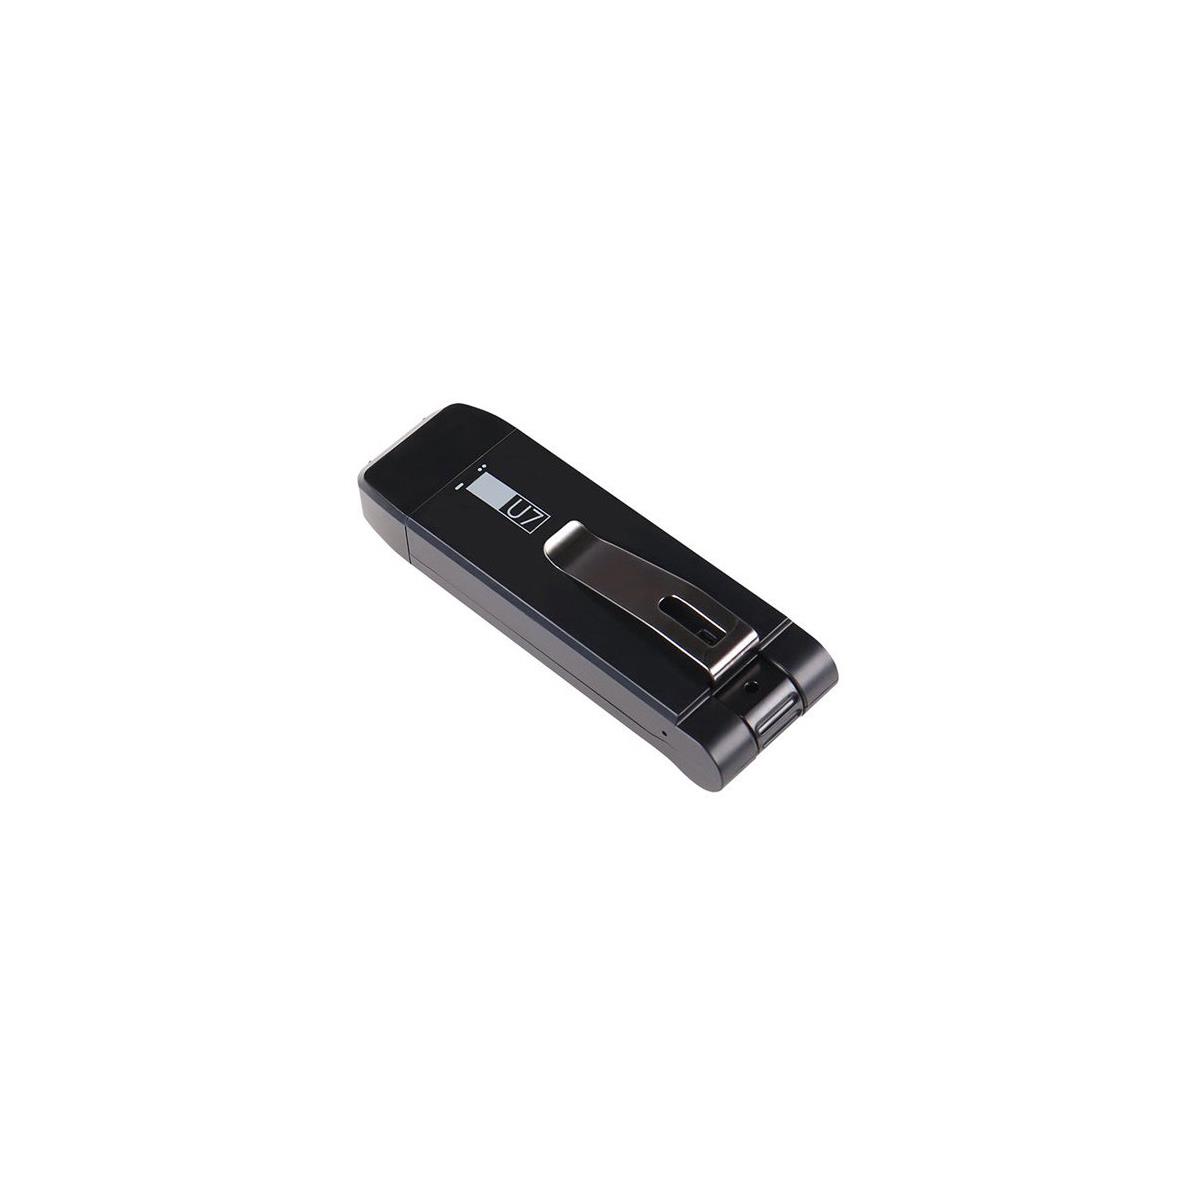 USB Stick with 720p Covert Camera and DVR - KJB Security Products DVR707